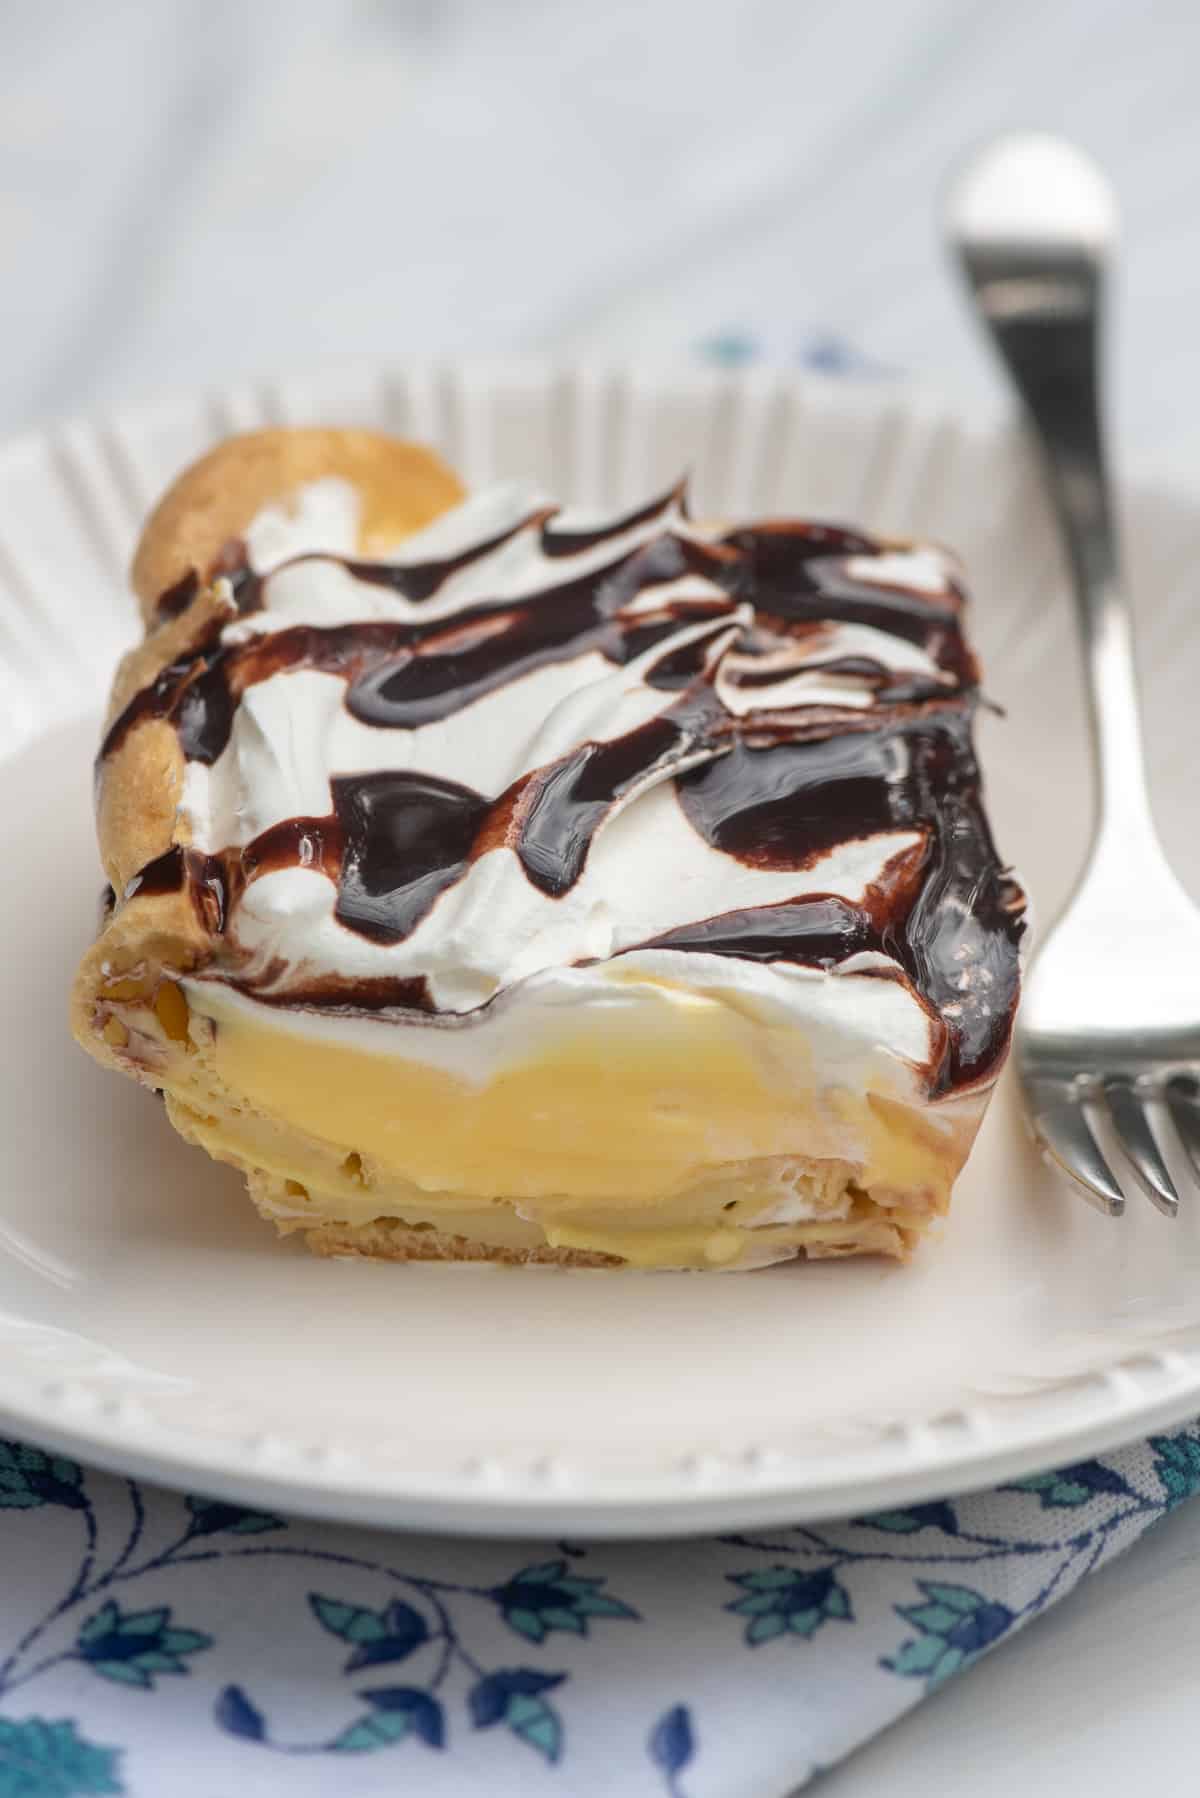 A slice of cream puff dessert on a white plate with a fork.